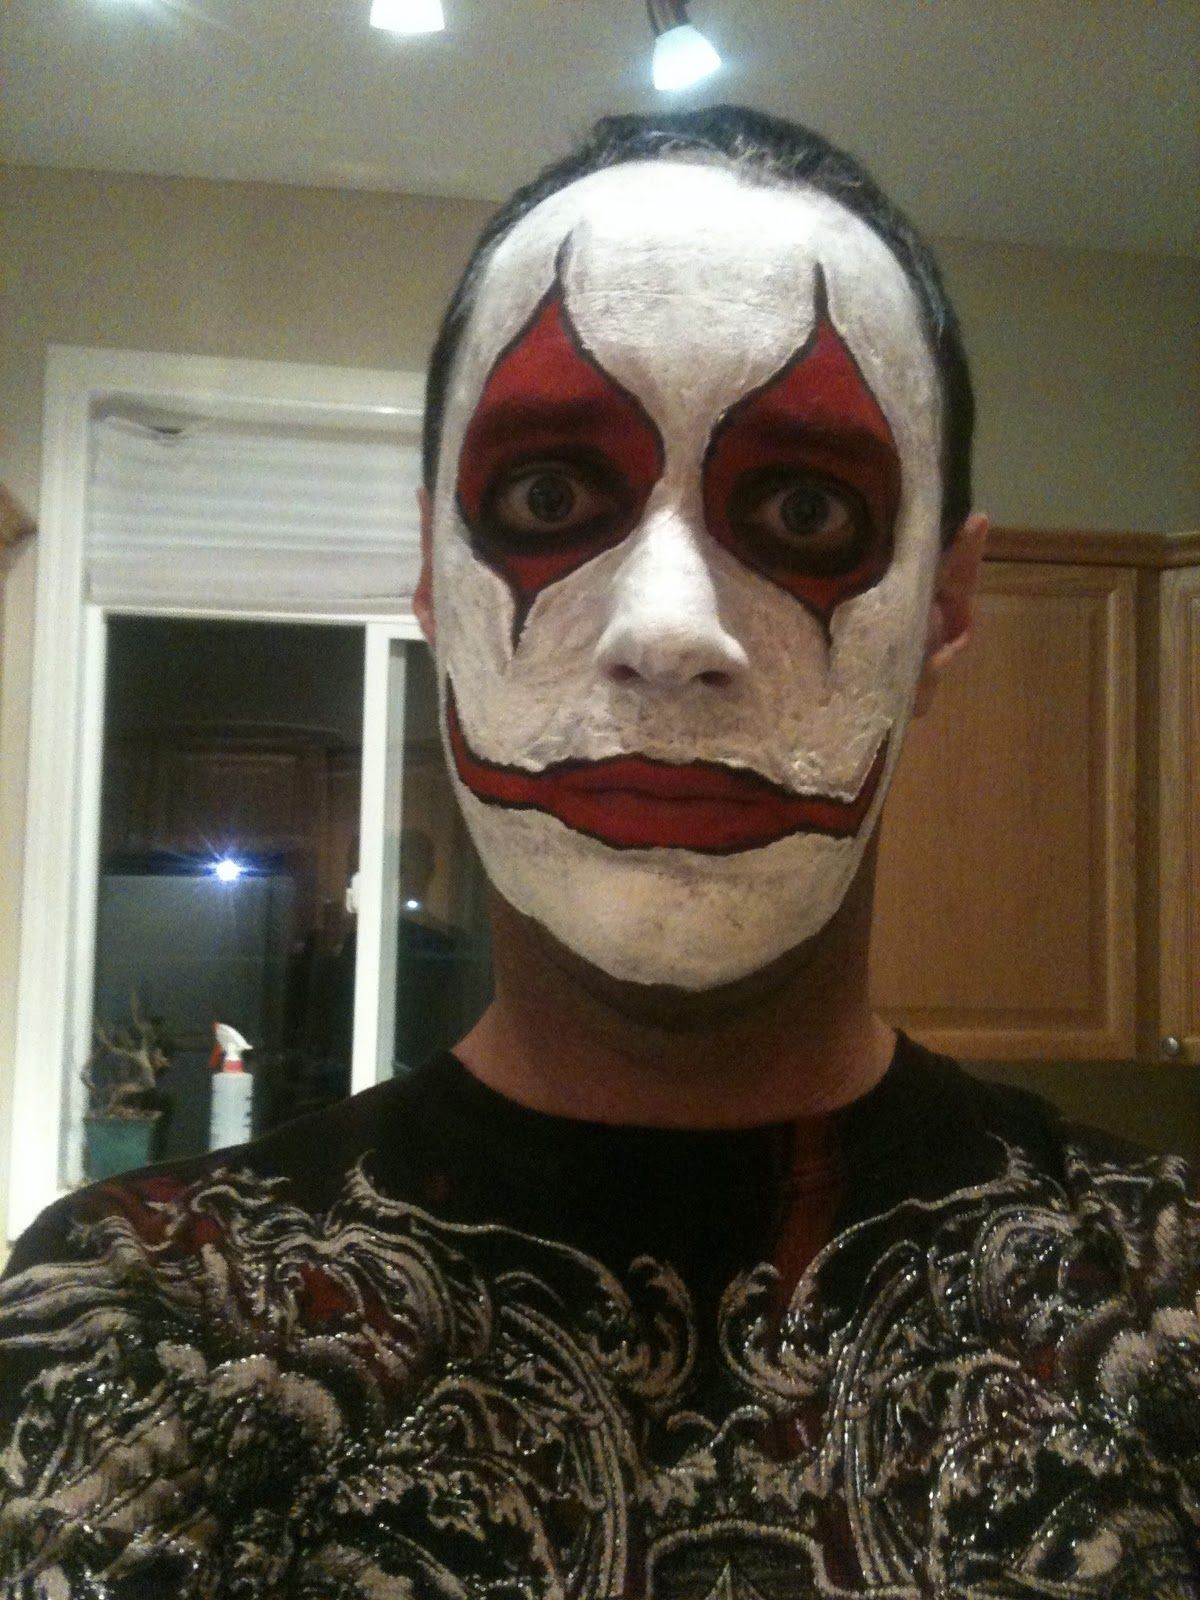 silly clown makeup ideas for men with beards.